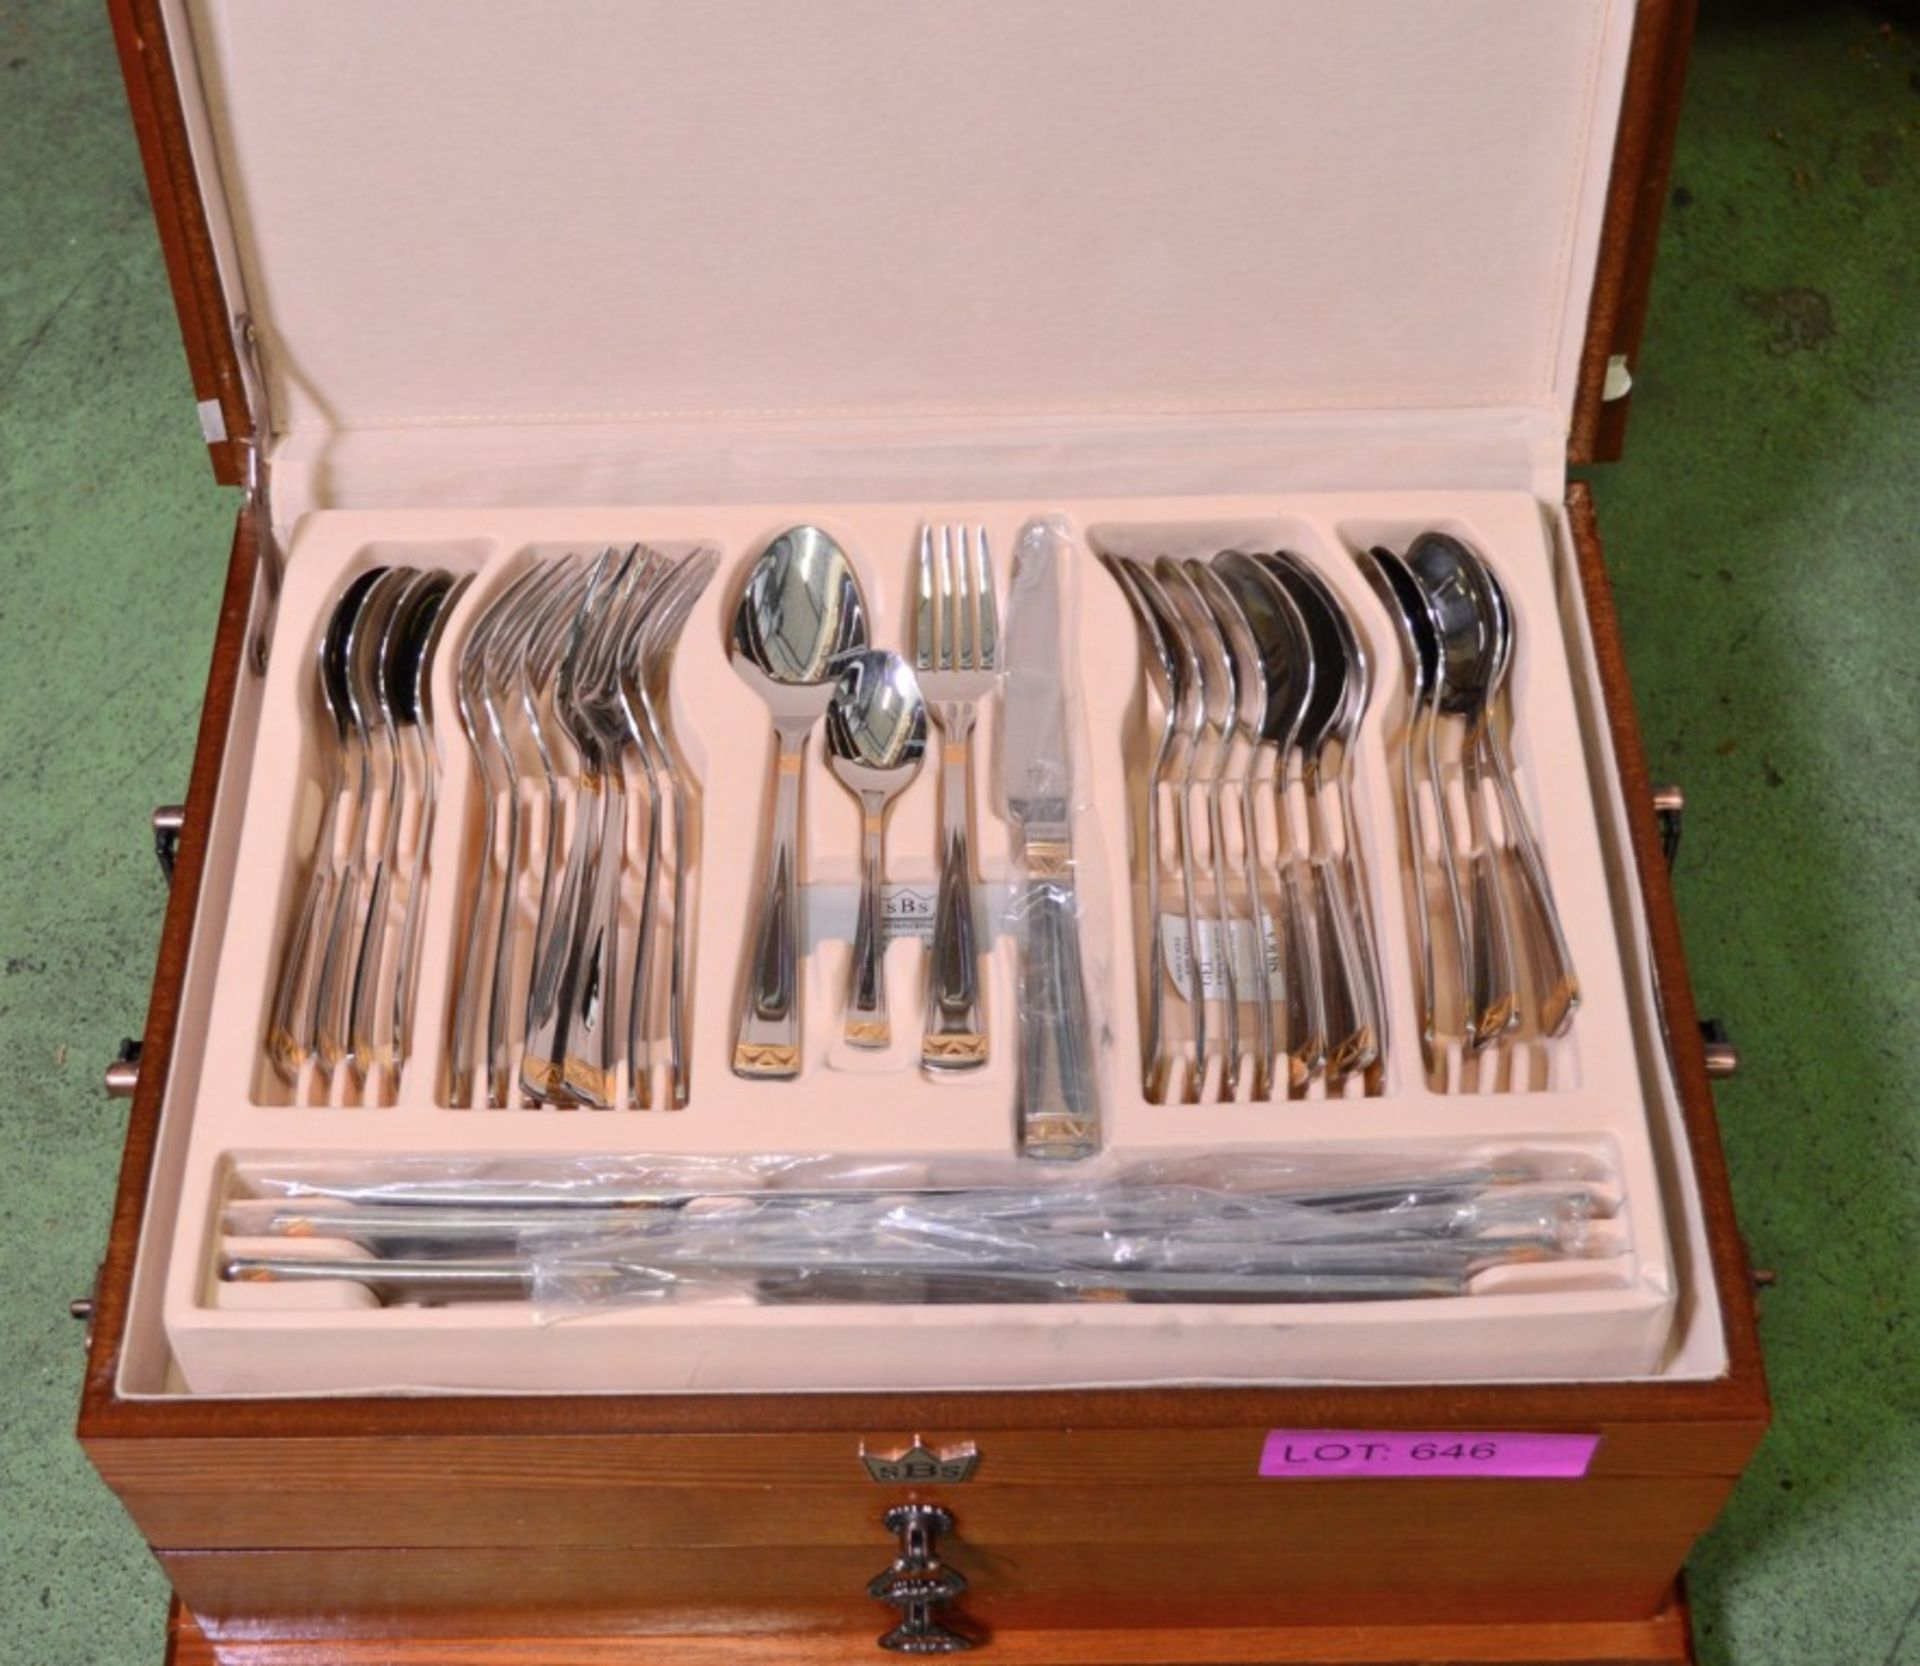 Cutlery Set in Wooden Case. - Image 2 of 4